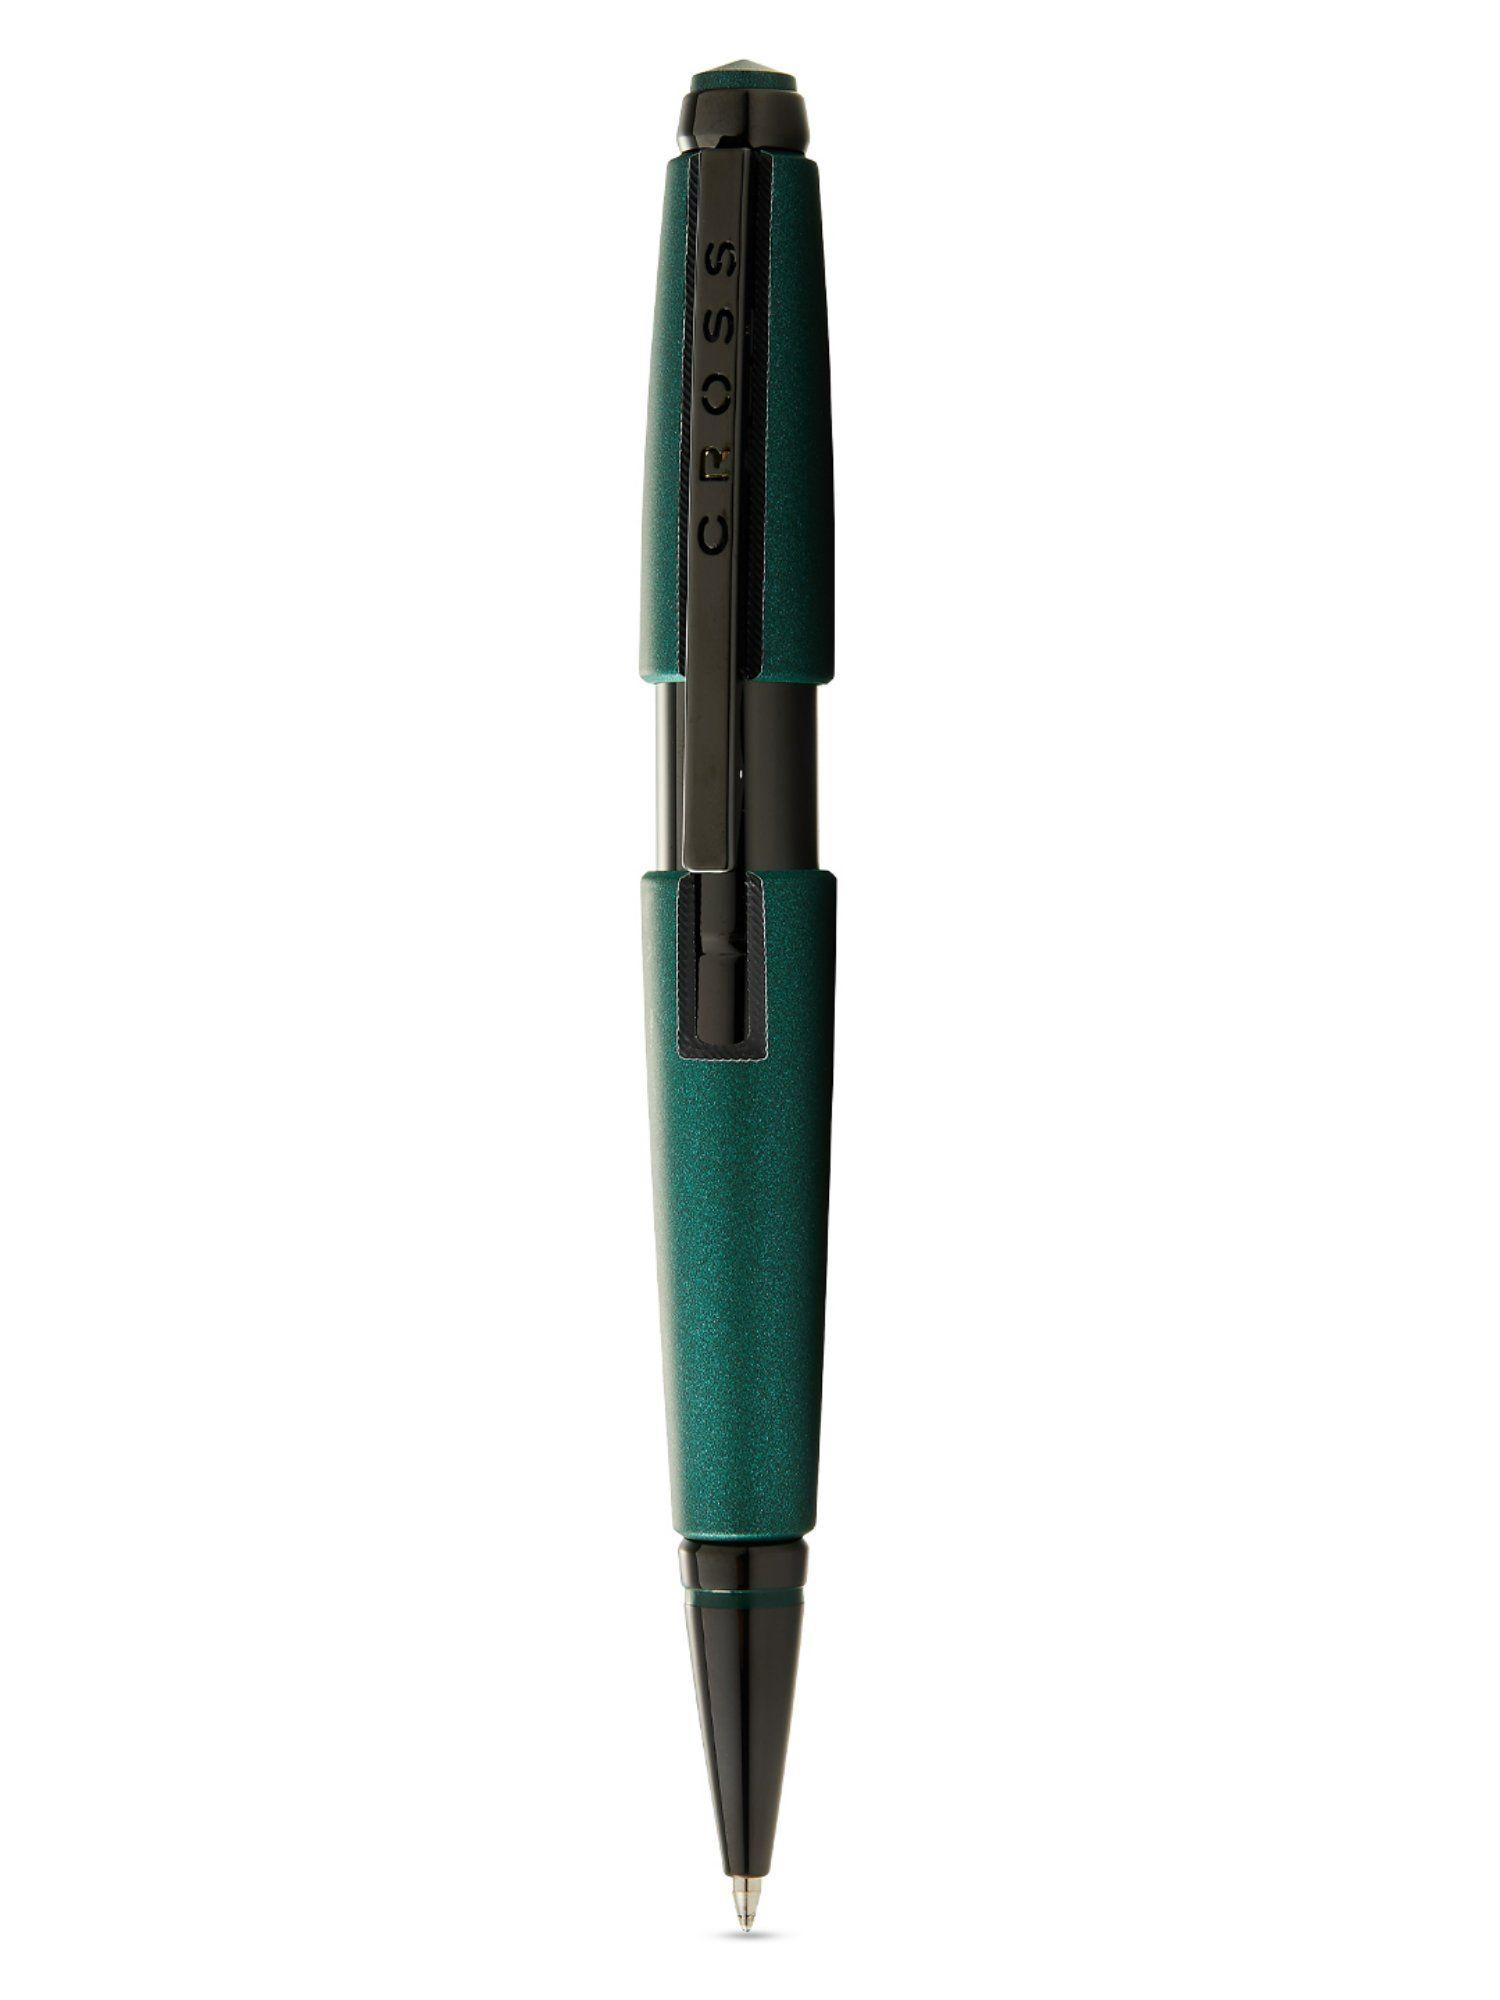 at0555-13 edge green matt lacquer rollingball pen with pvd appts